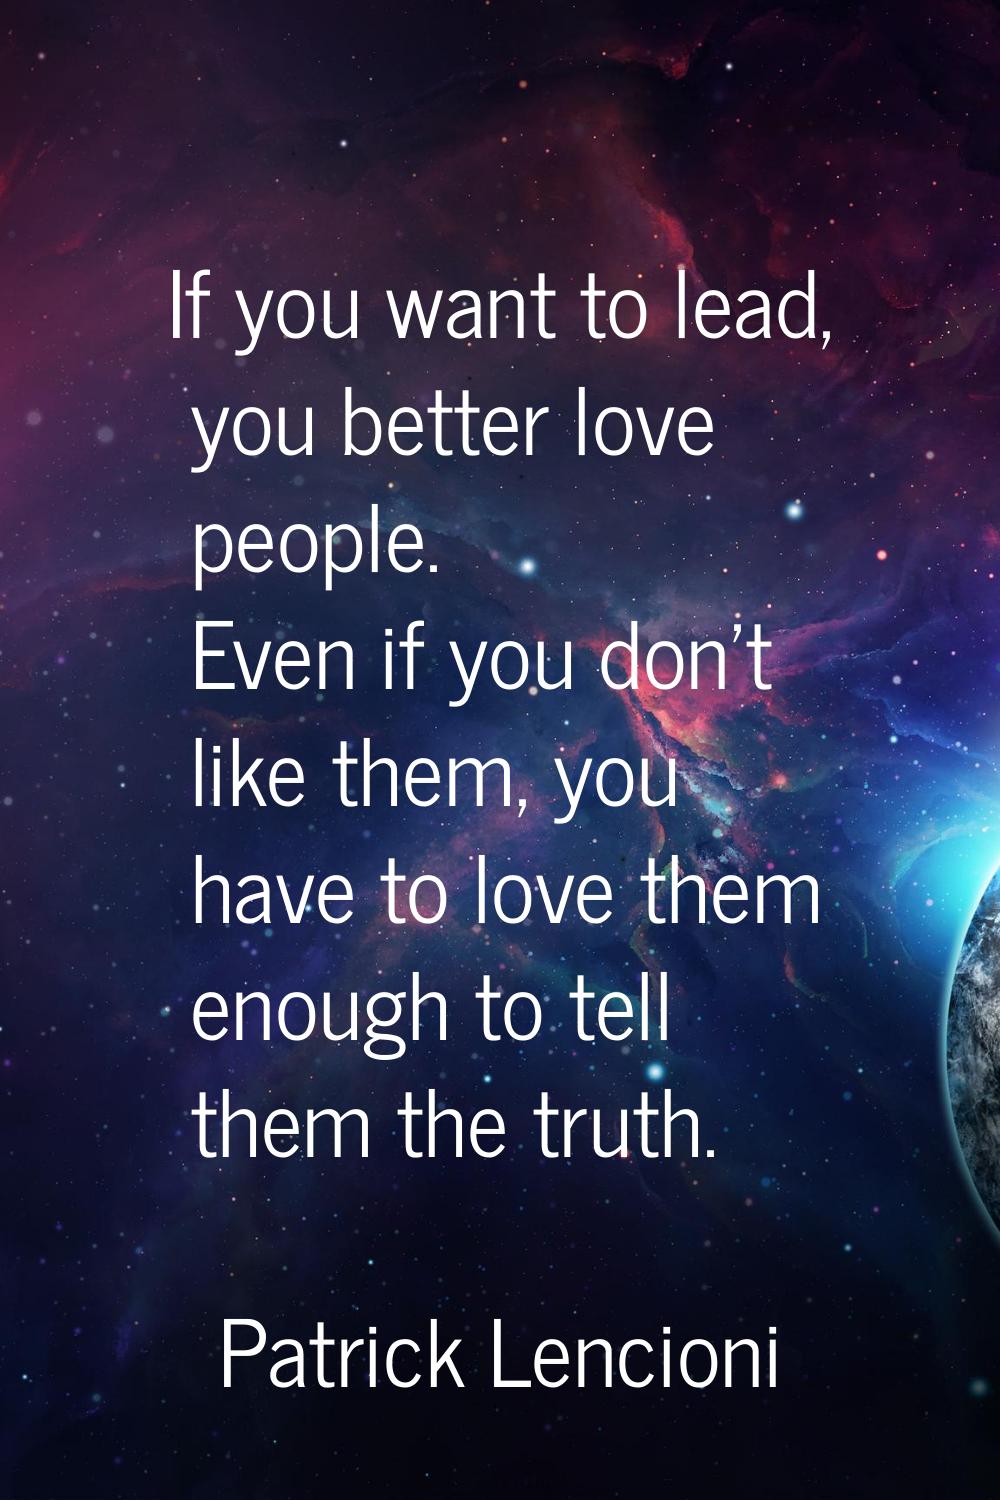 If you want to lead, you better love people. Even if you don't like them, you have to love them eno